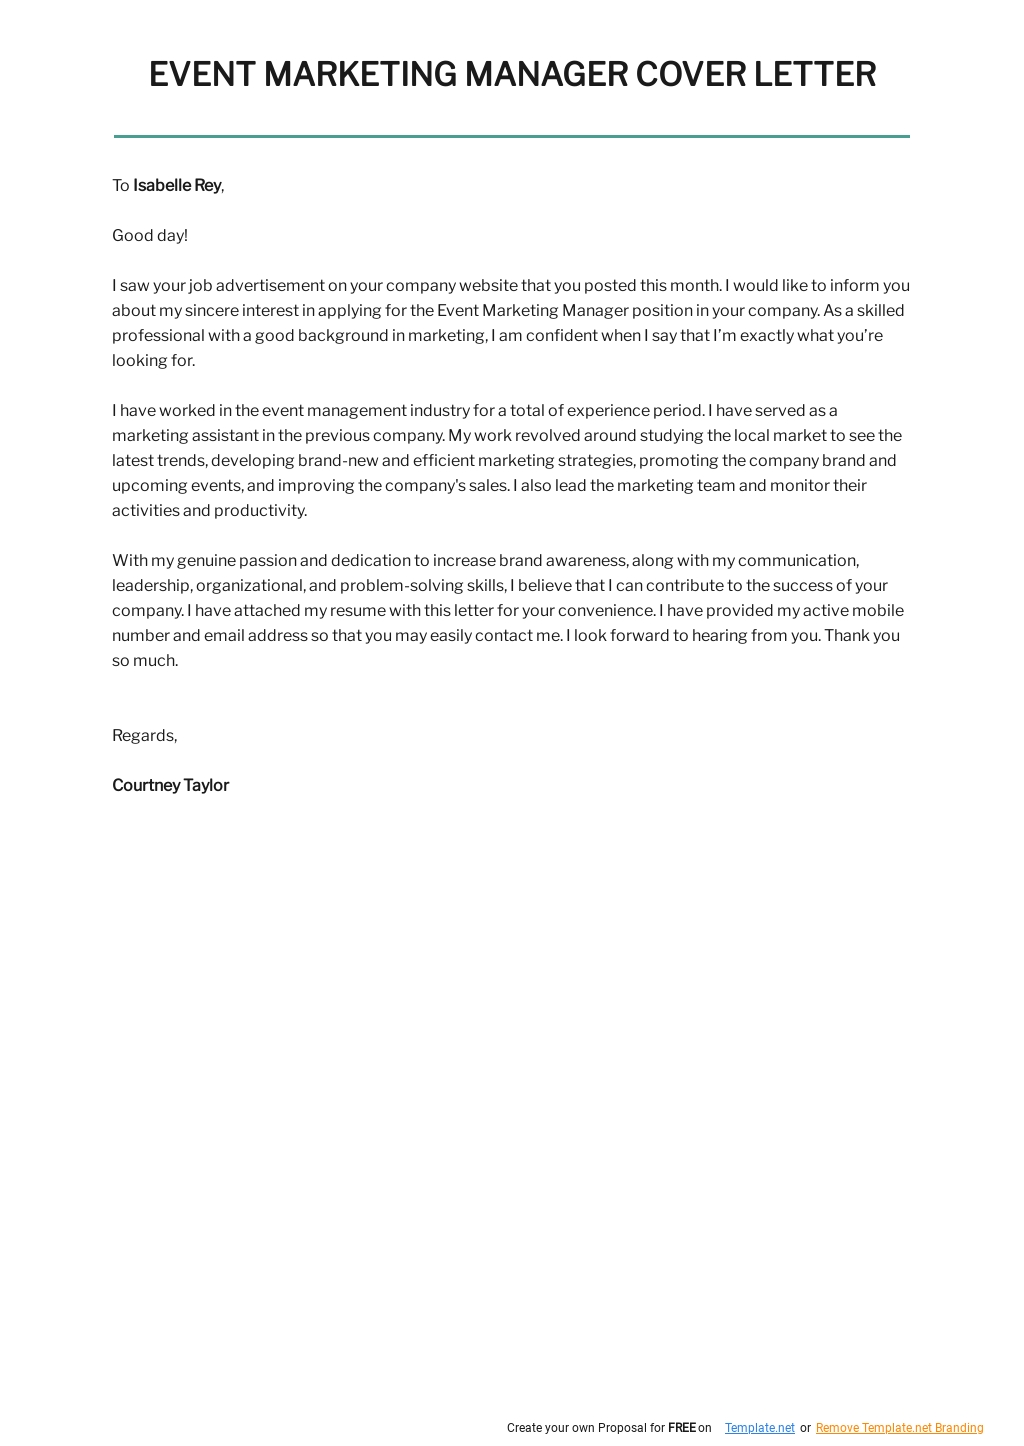 Event Marketing Manager Cover Letter Template.jpe